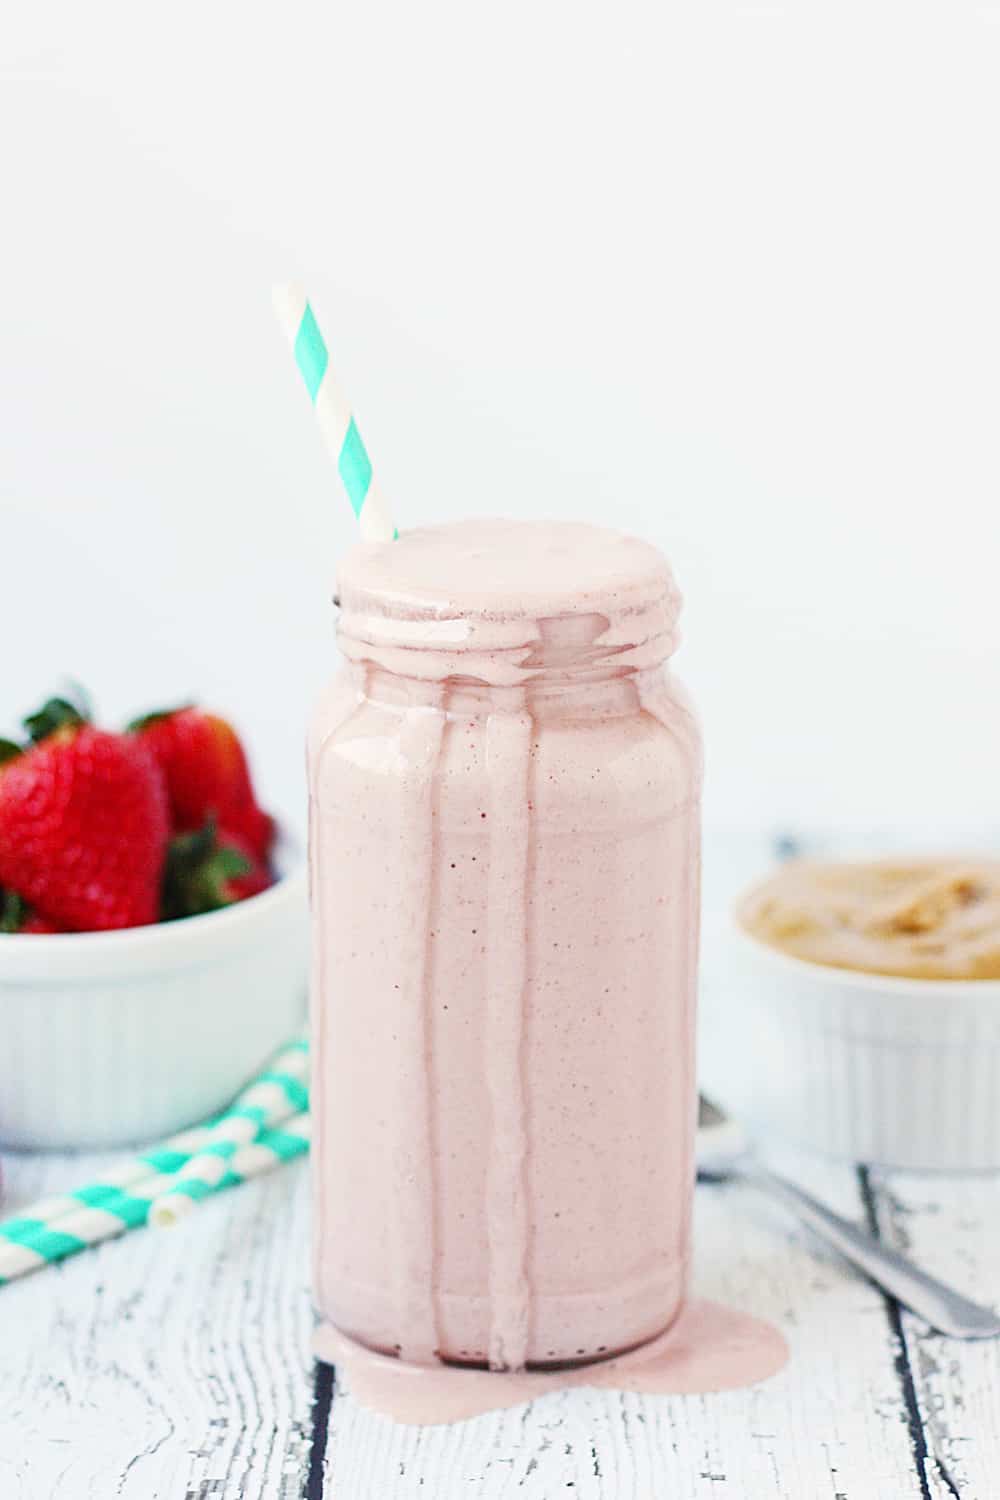 3-Ingredient Peanut Butter and Jelly Smoothie